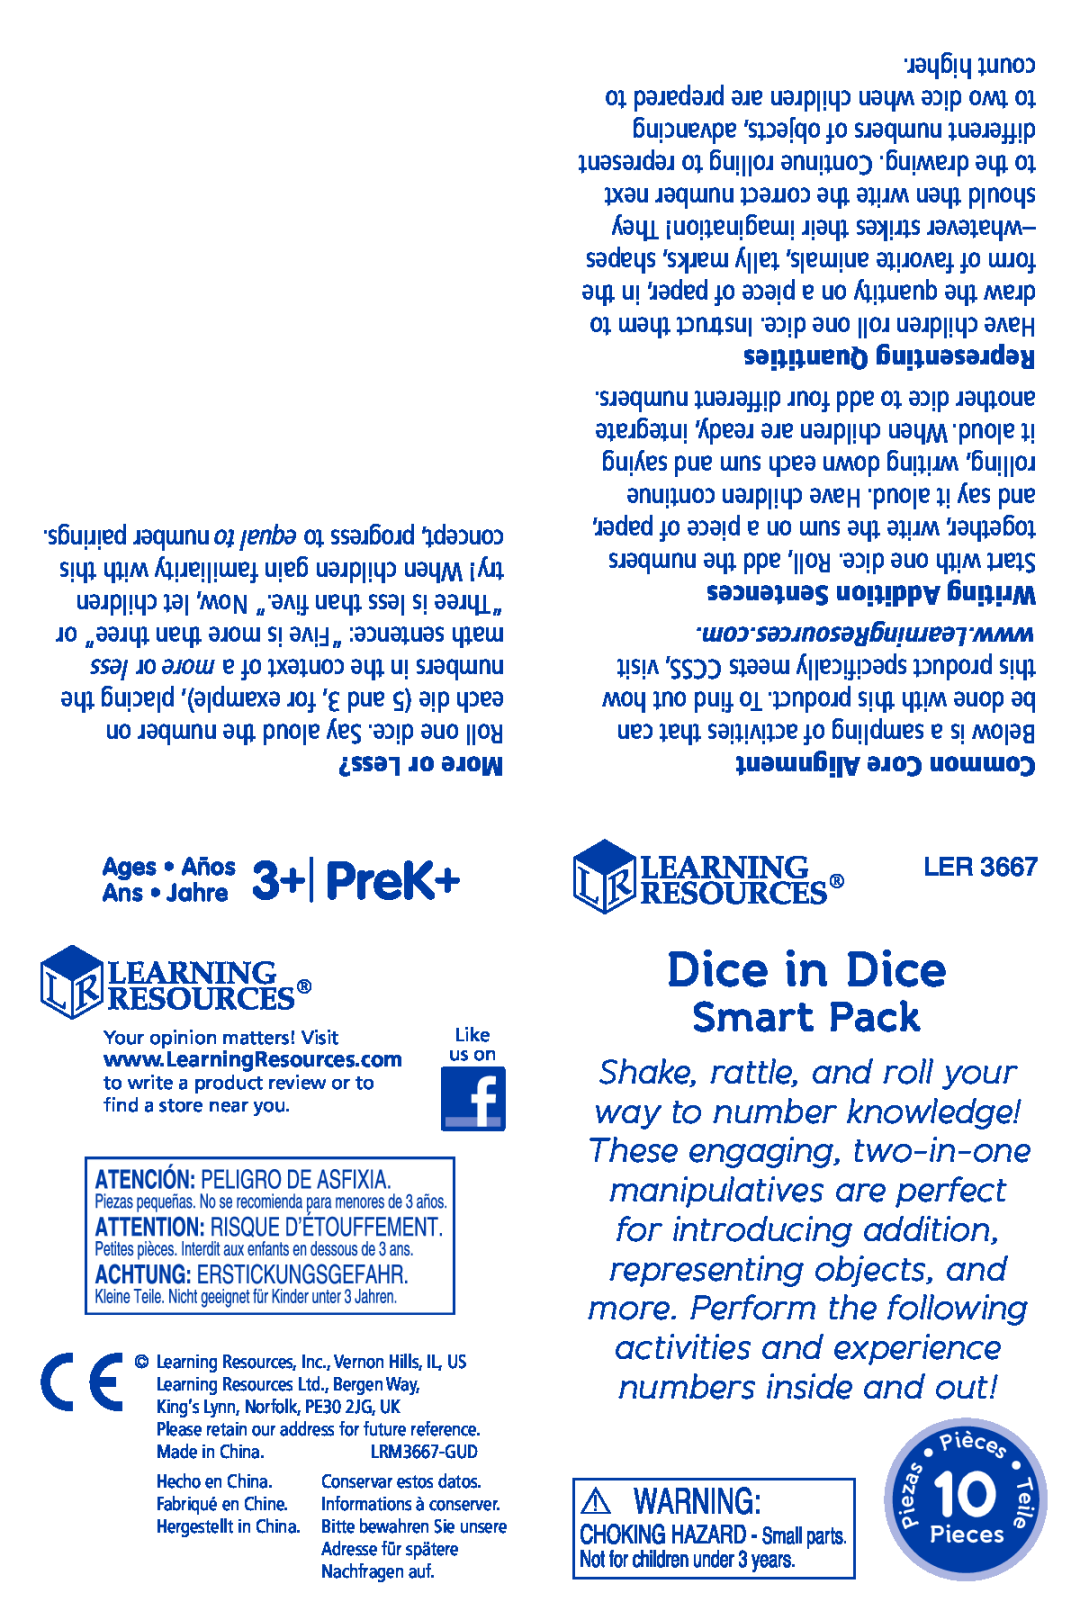 Learning Resources ler3667 manual Ans Jahre, Ages Años, 10 le, 3+ PreK+, Dice in Dice, Smart Pack, Pieces, iè c 